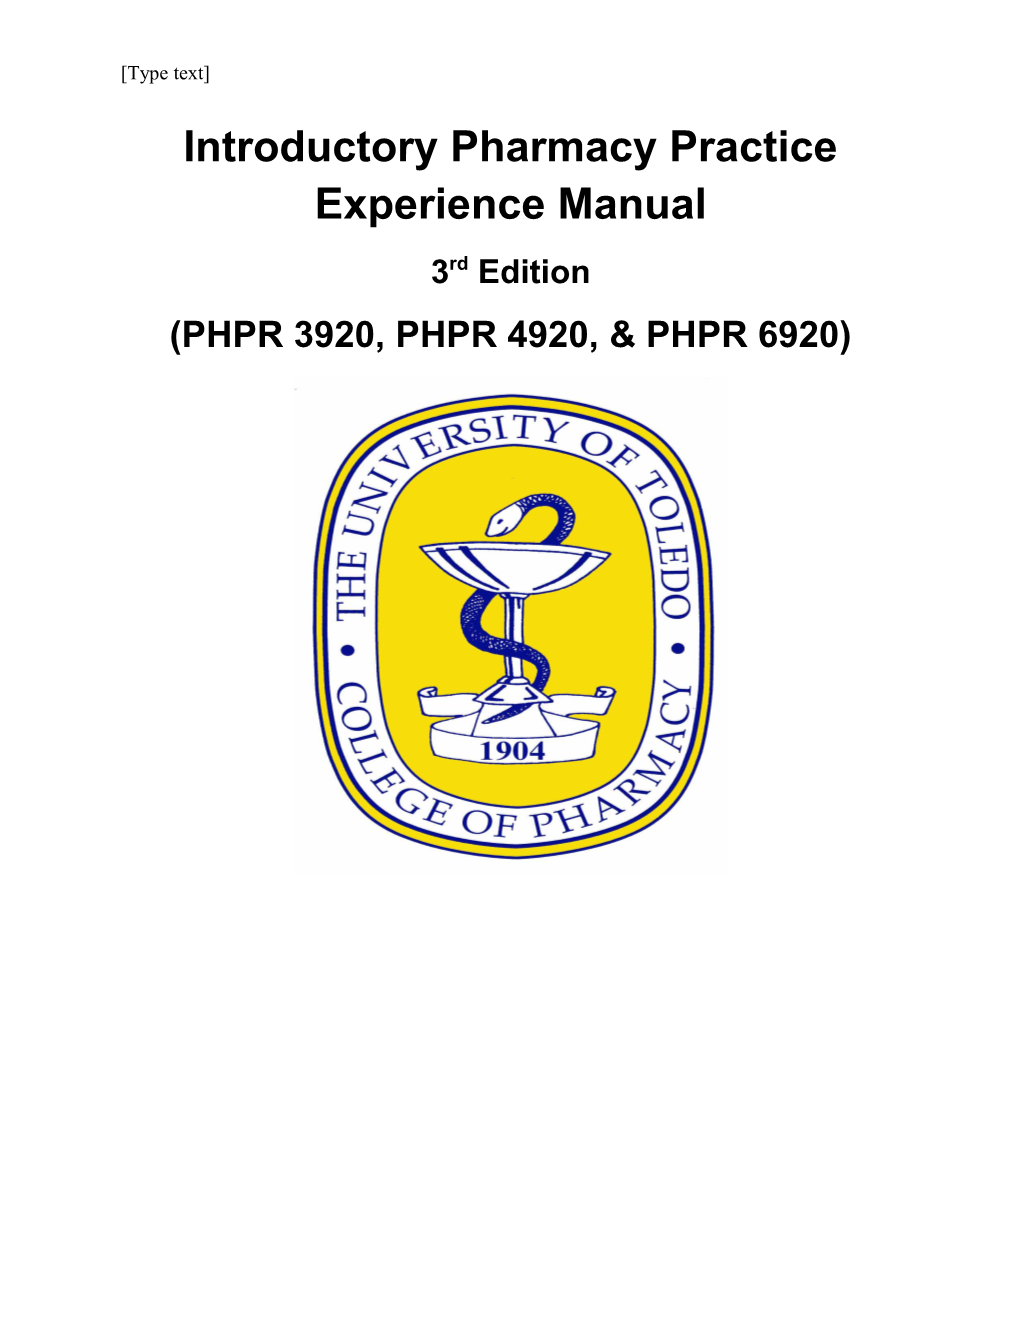 Introductory Pharmacy Practice Experience Manual